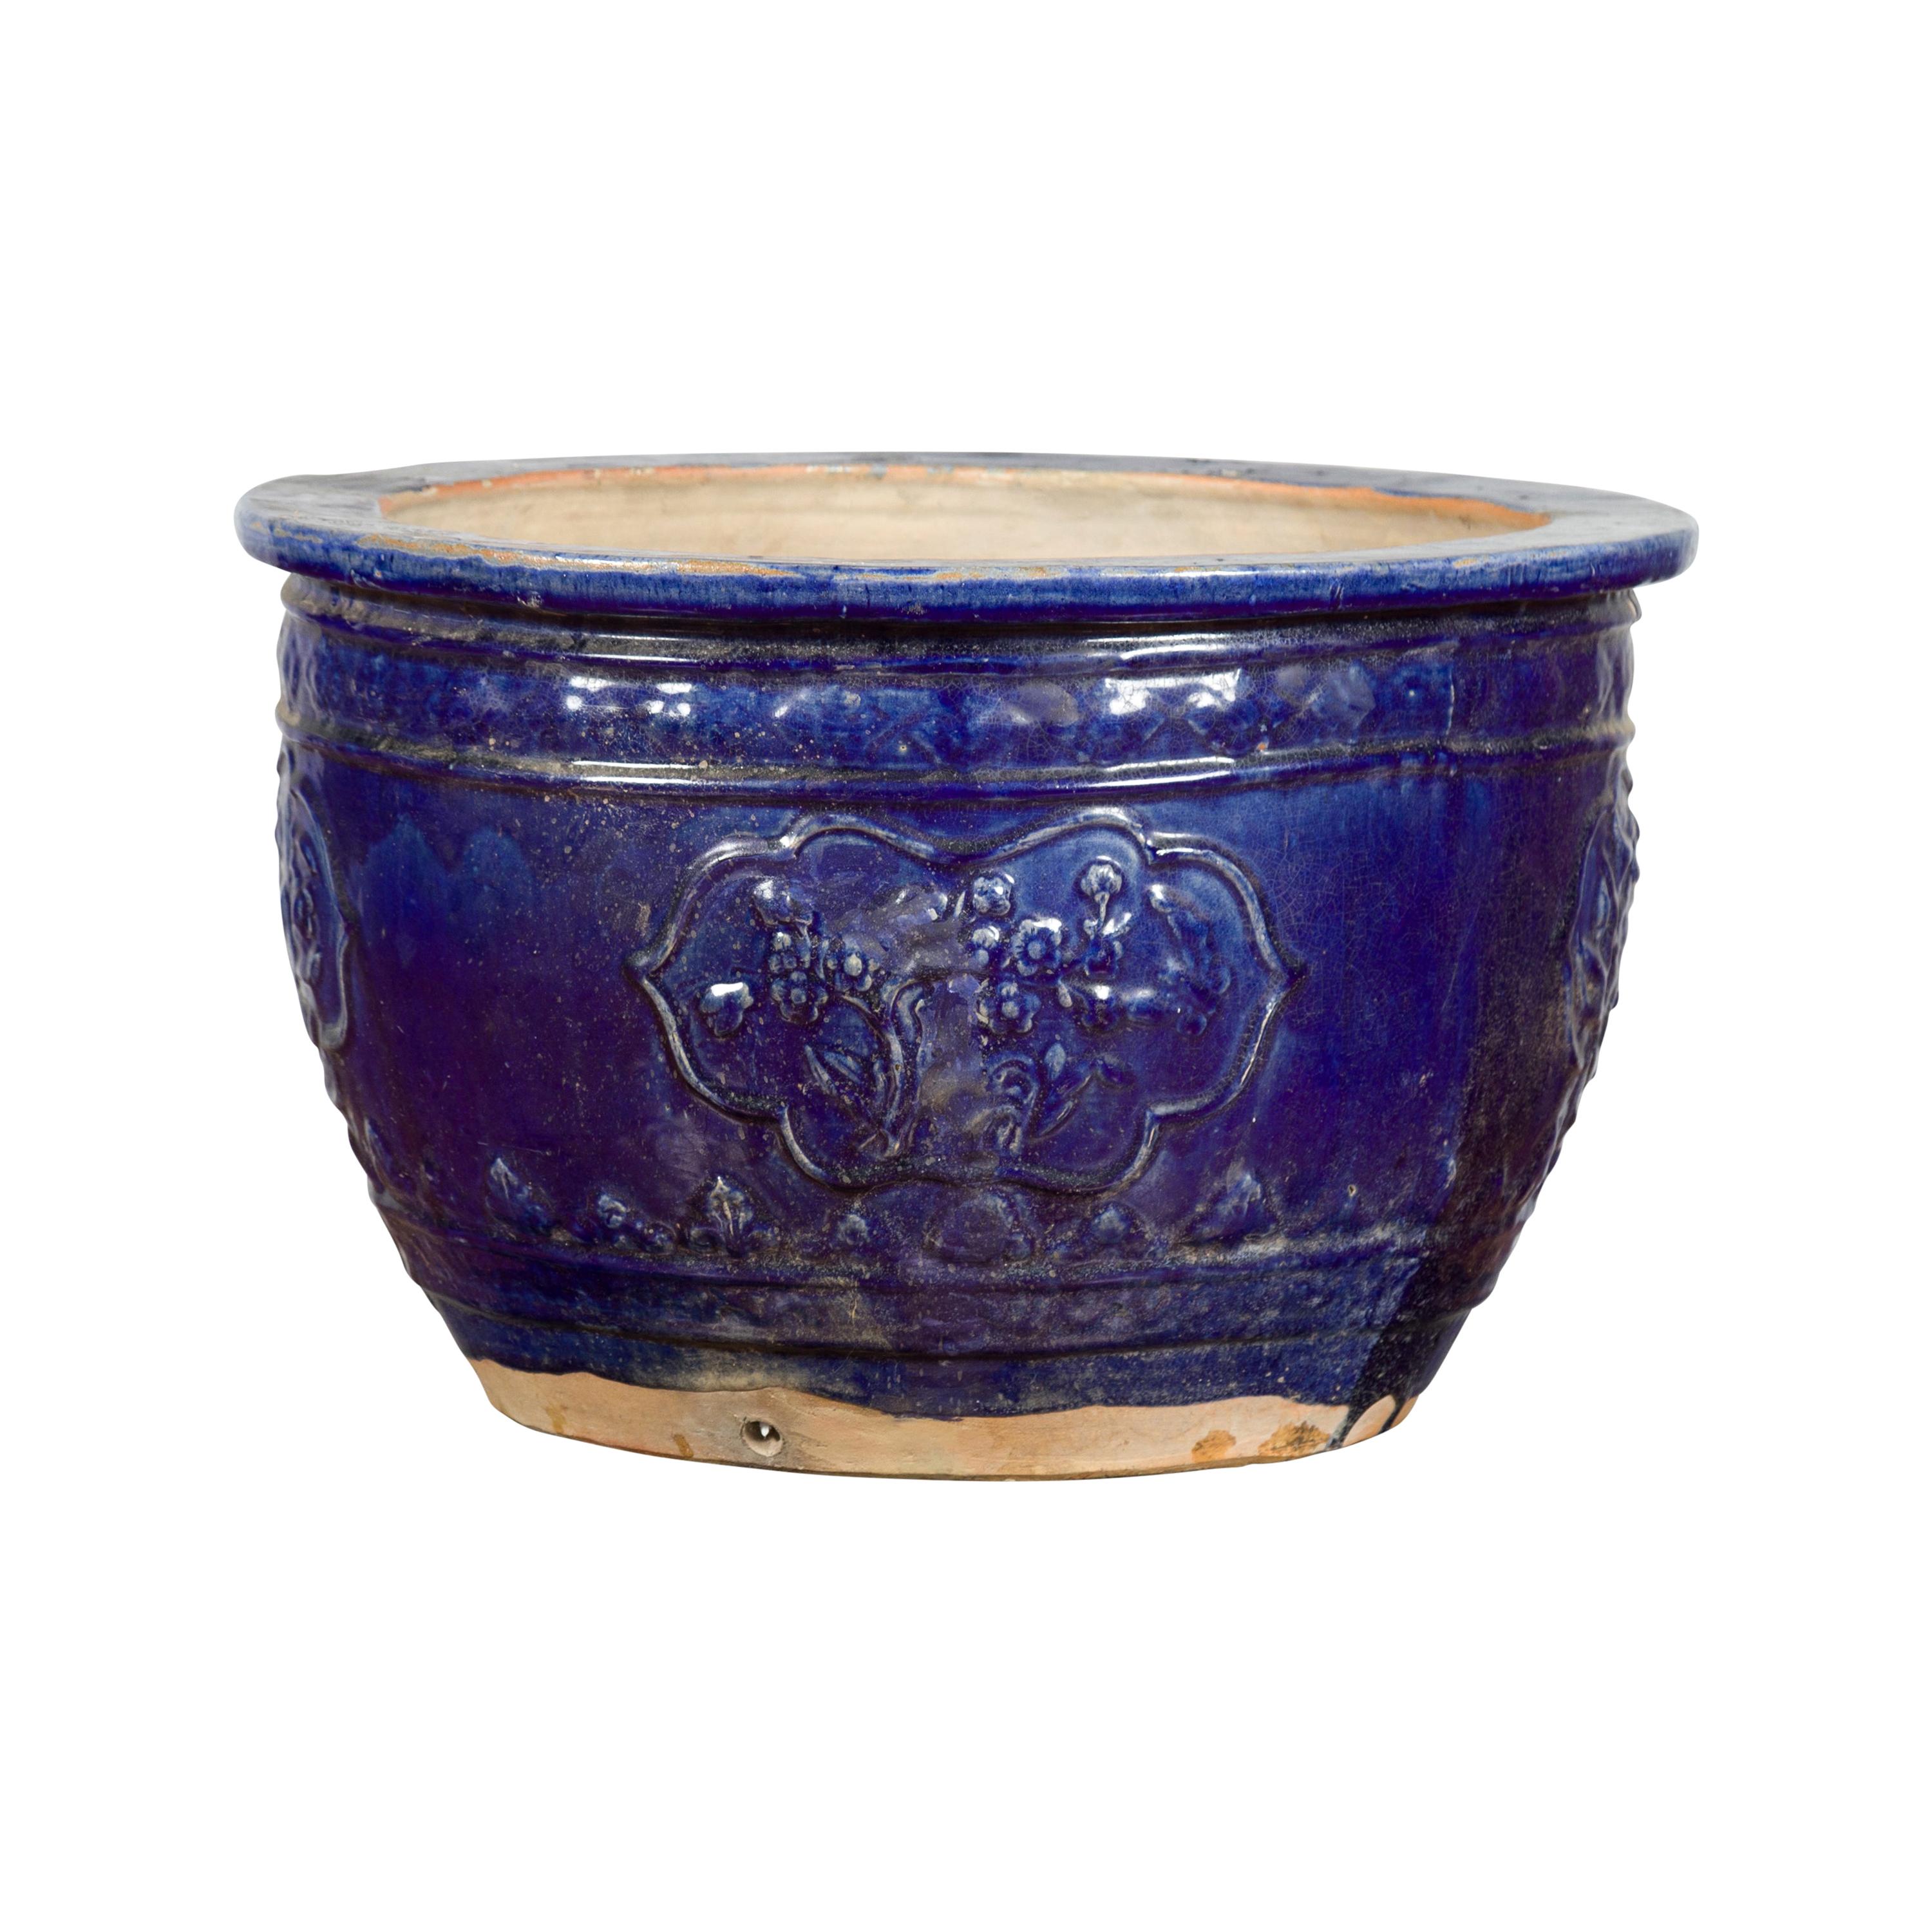 Large 19th Century Annamese Royal Blue Circular Planter with Floral Décor